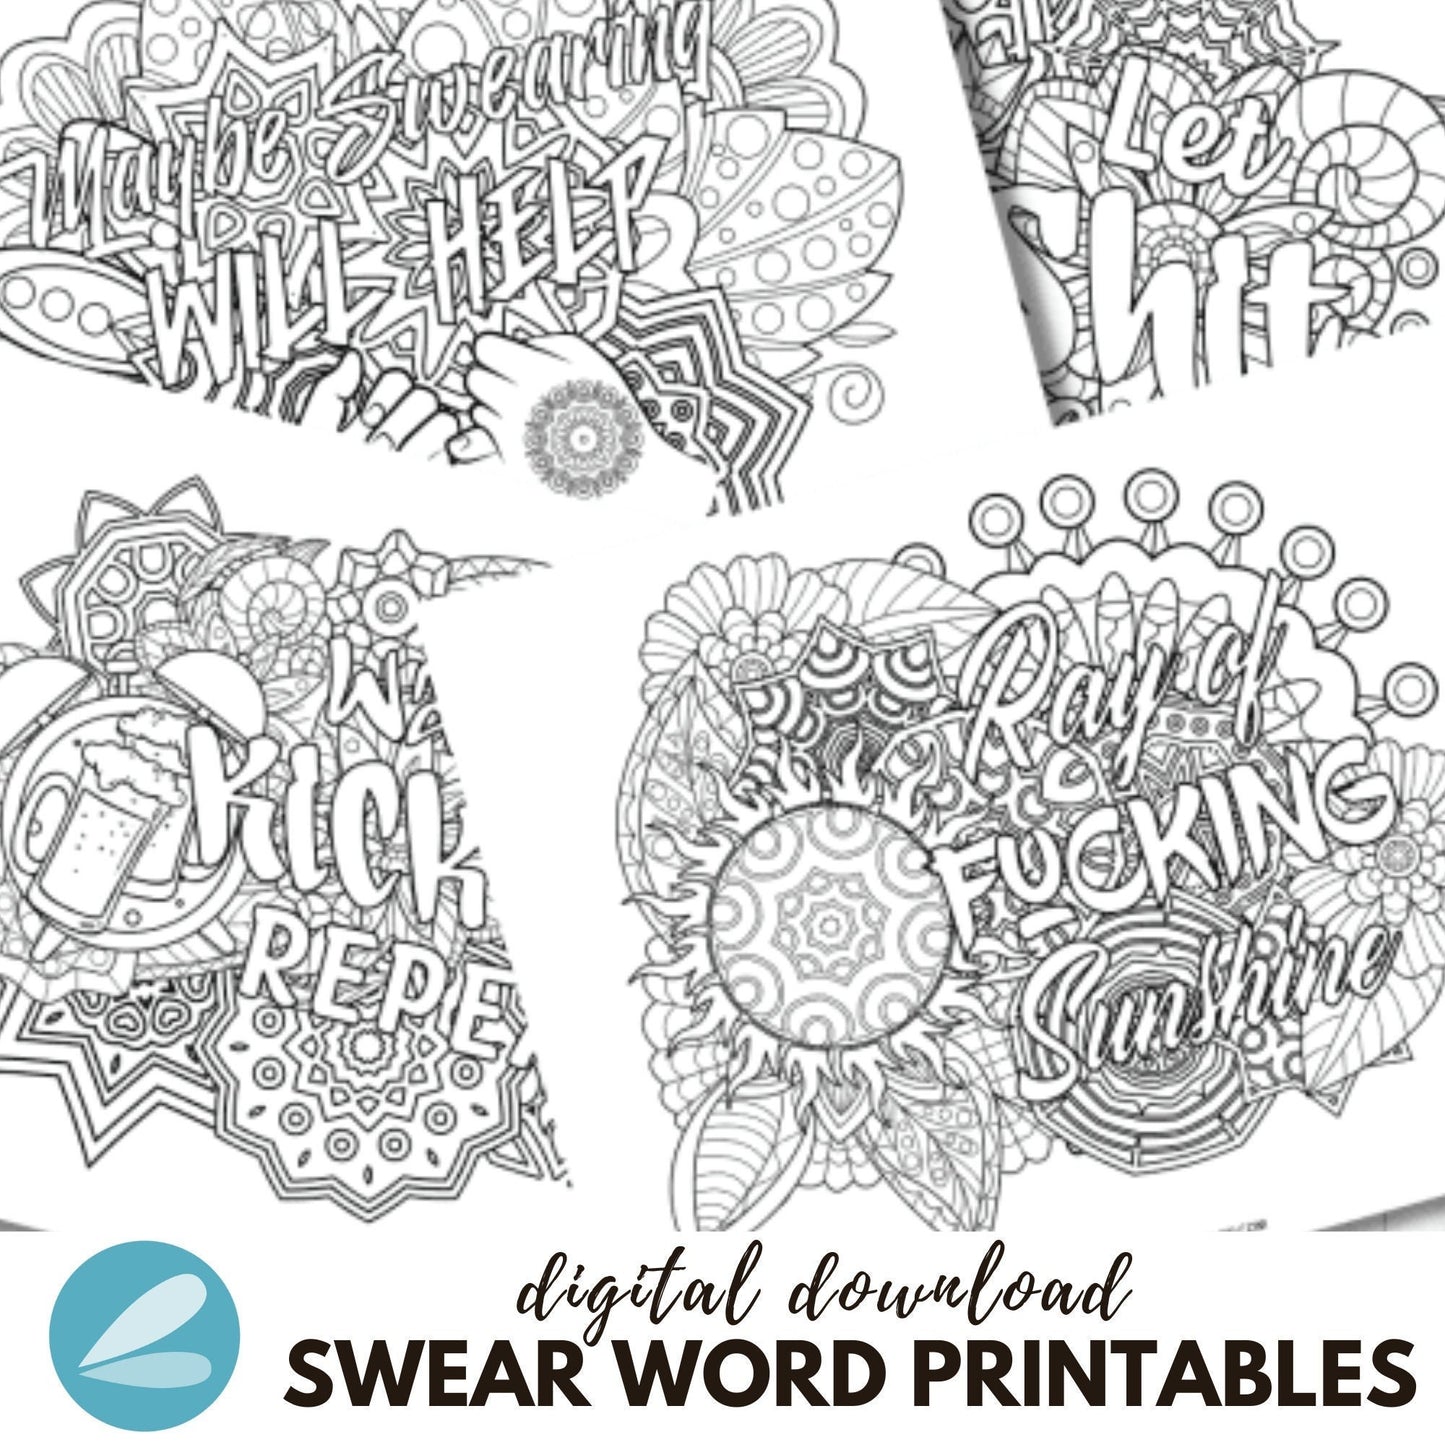 Swearing Printable Coloring Pages - Adult Swear Word Coloring Sheets PDF - Instant Download